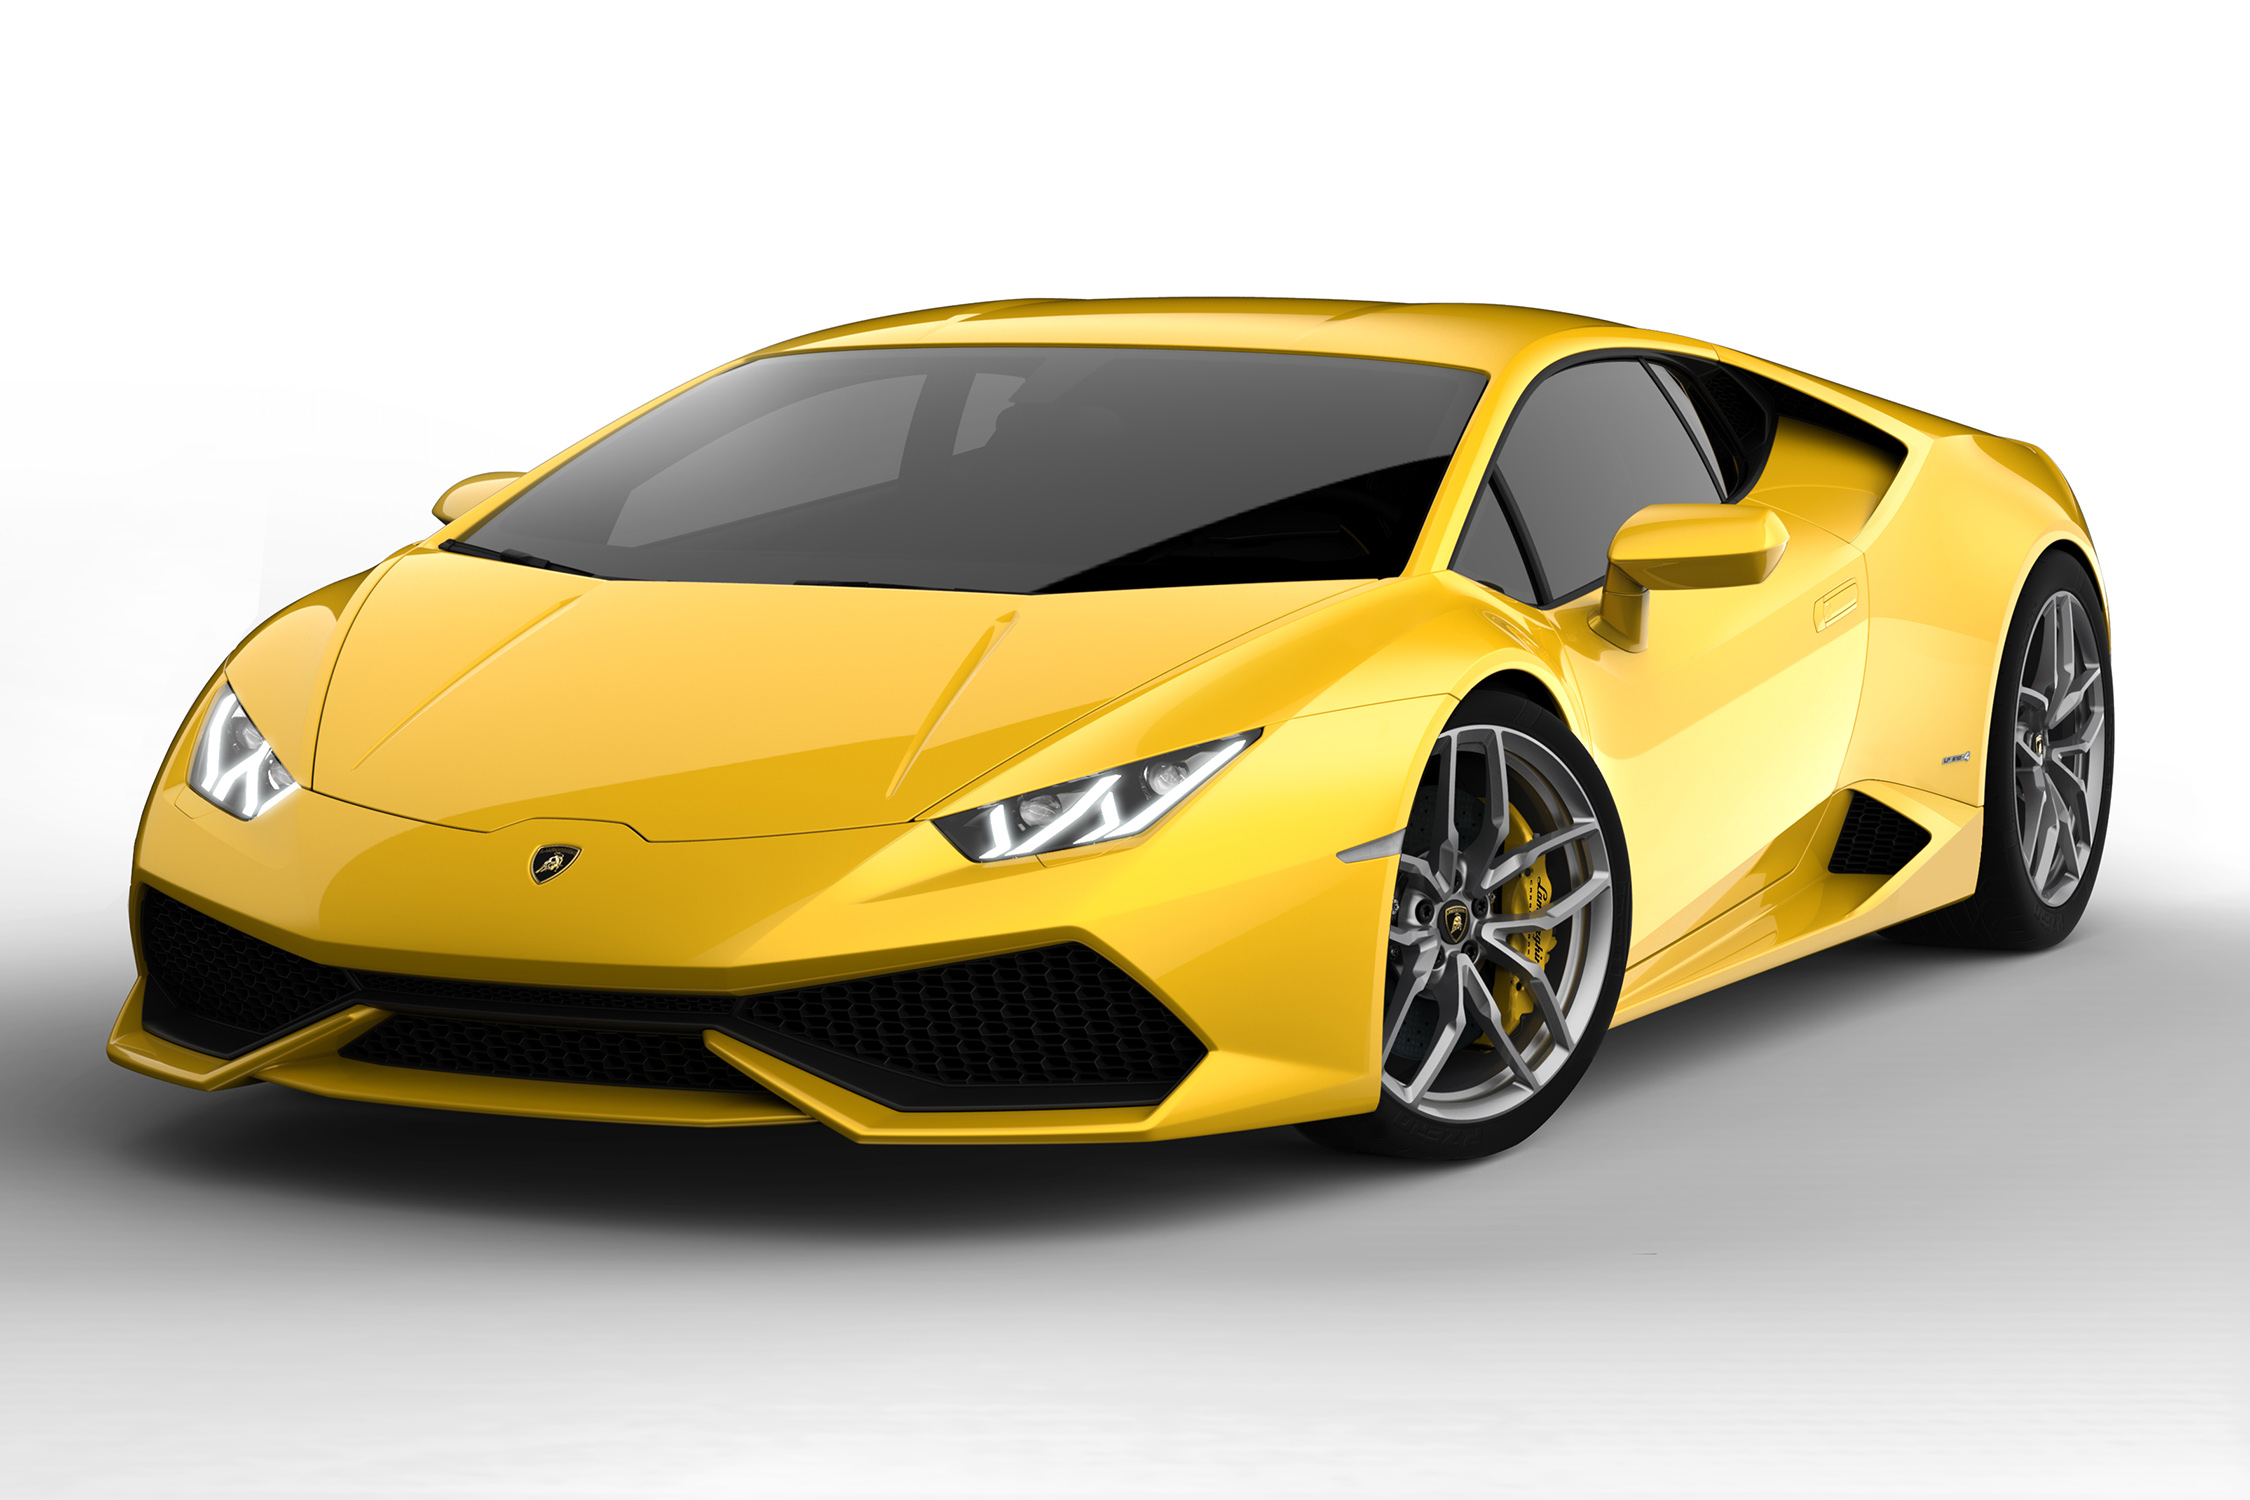 The cars of The Grand Tour season 2: Lamborghini Huracan Performante What could be better than Lamborghini at its silliest? Perhaps it’s Lamborghini at its most serious; stacking its smallest car with lightweight aluminium and carbon-fibre parts, fitting it with active aerodynamics, winding up its V10 engine to 631bhp, and showing its track ability by bagging a Nürburgring lap record. Richard Hammond finds out.